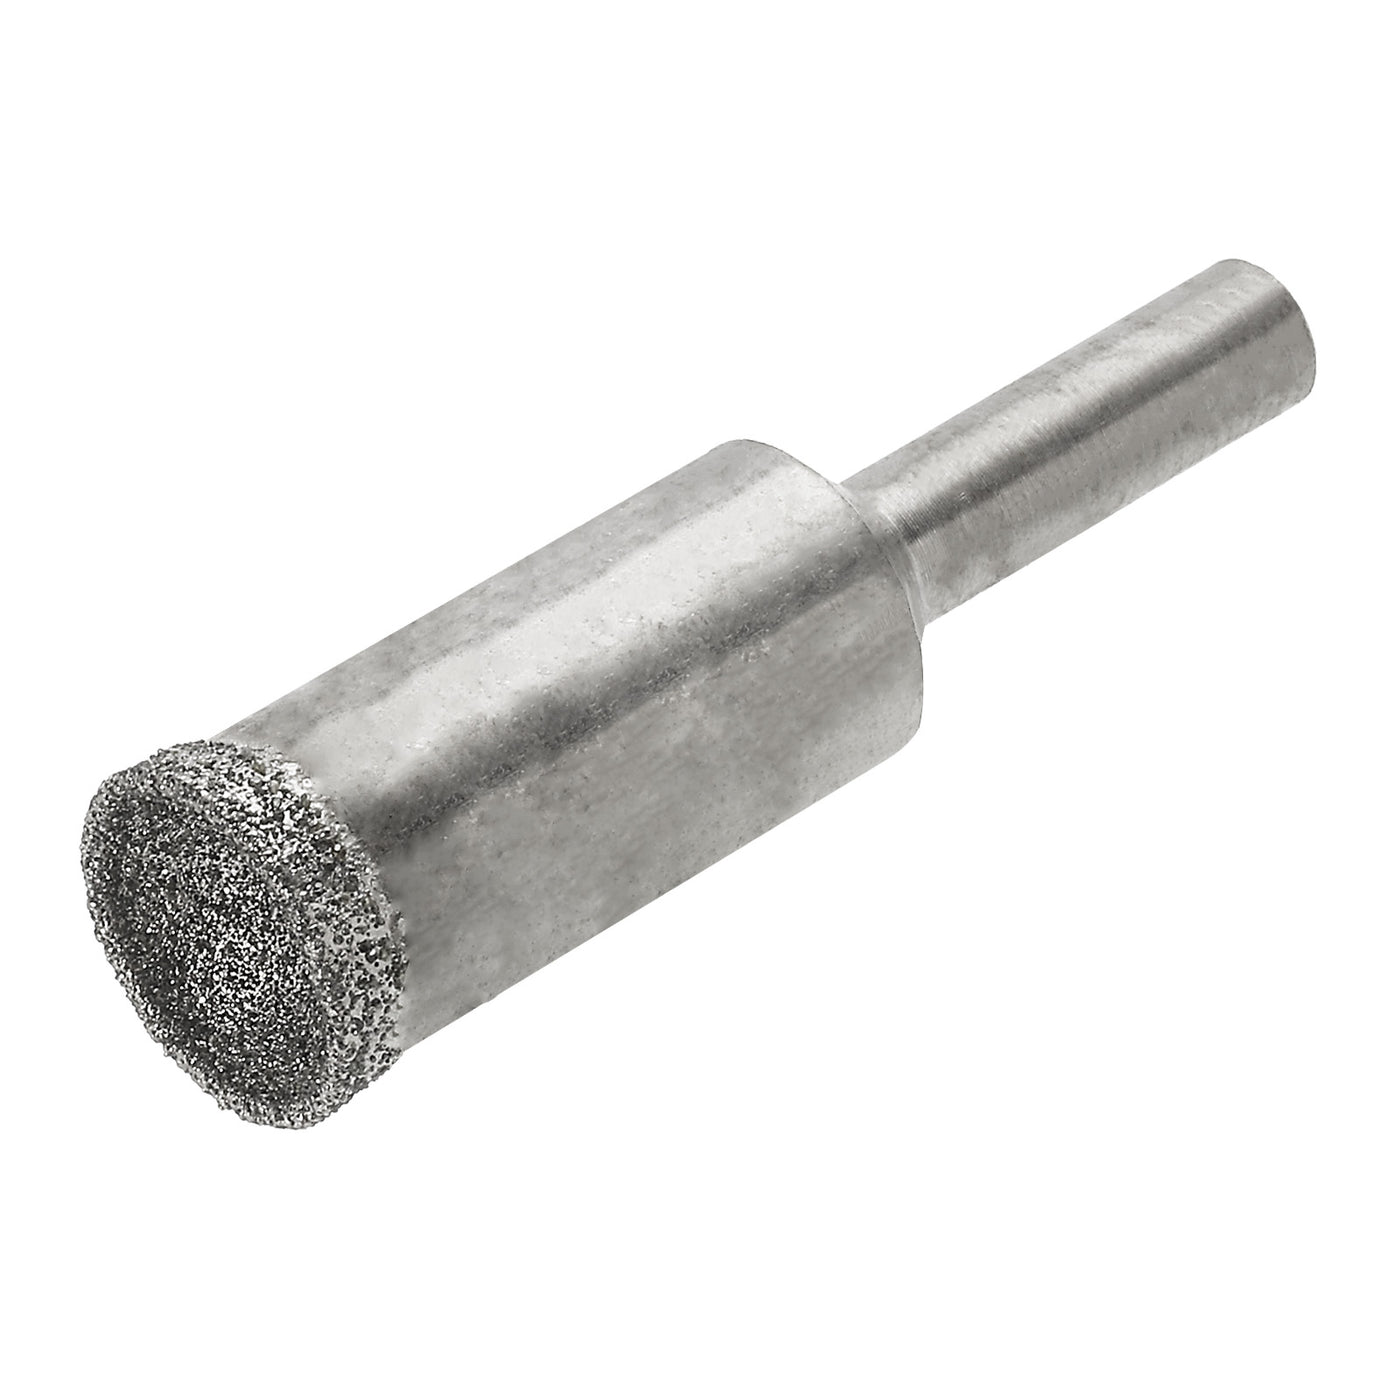 uxcell Uxcell 13mm 100 Grits Diamond Mounted Point Spherical Concave Head Bead Grinding Bit